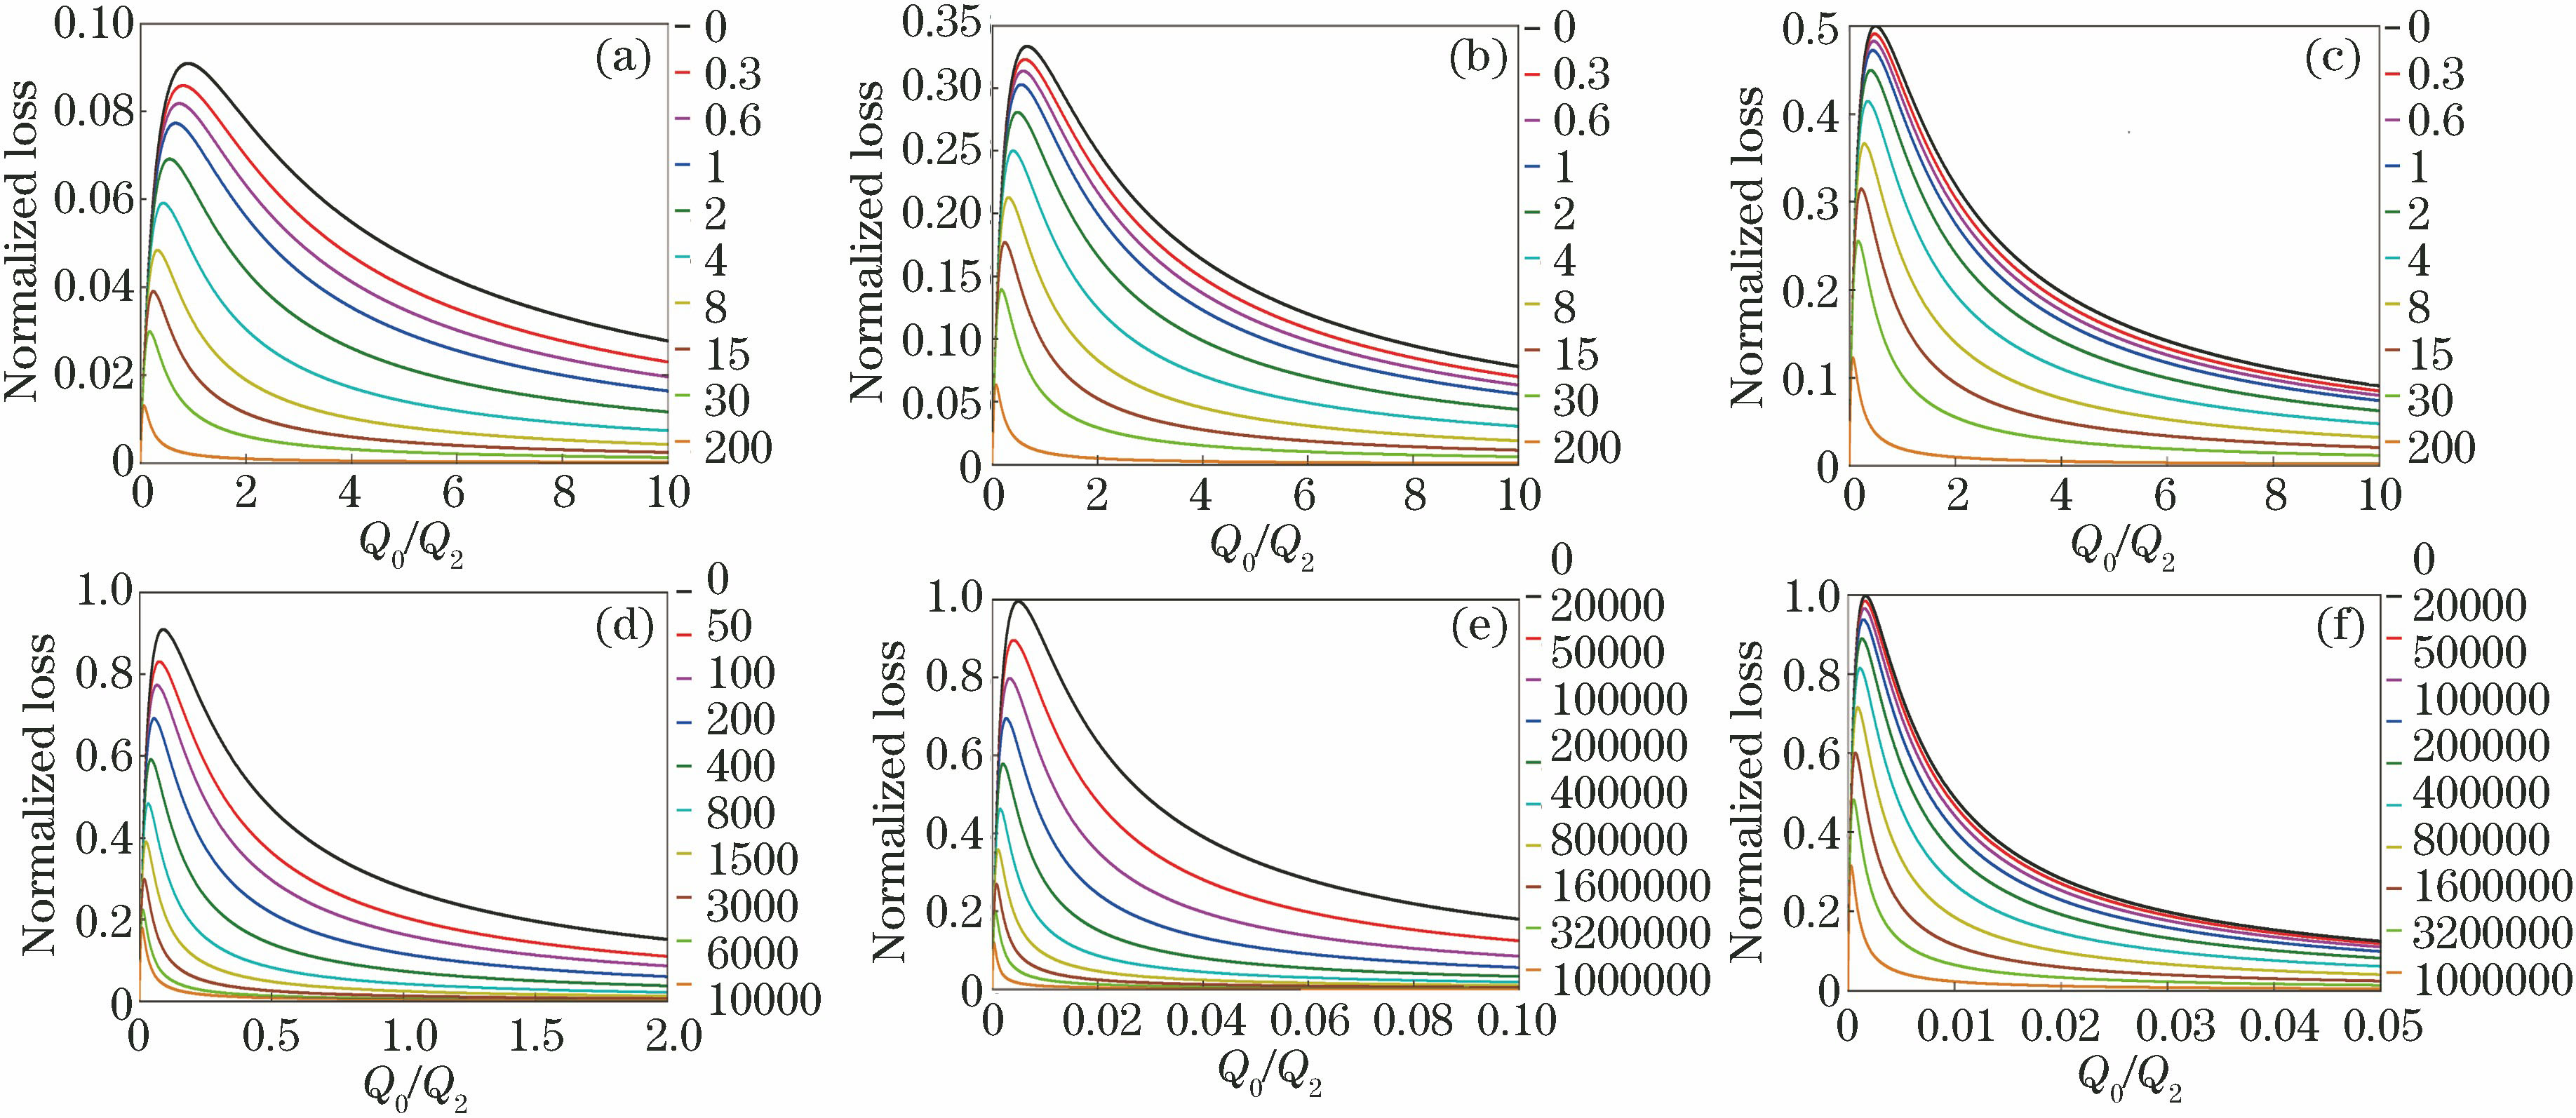 Influence of different ratios of Q2/Q1 and values of phase detuning factor (ω-ω0)2τ22 on normalized loss ratio. (a) Q2/Q1=0.1; (b) Q2/Q1=0.5; (c) Q2/Q1=1; (d) Q2/Q1=10; (e) Q2/Q1=200; (f) Q2/Q1=600